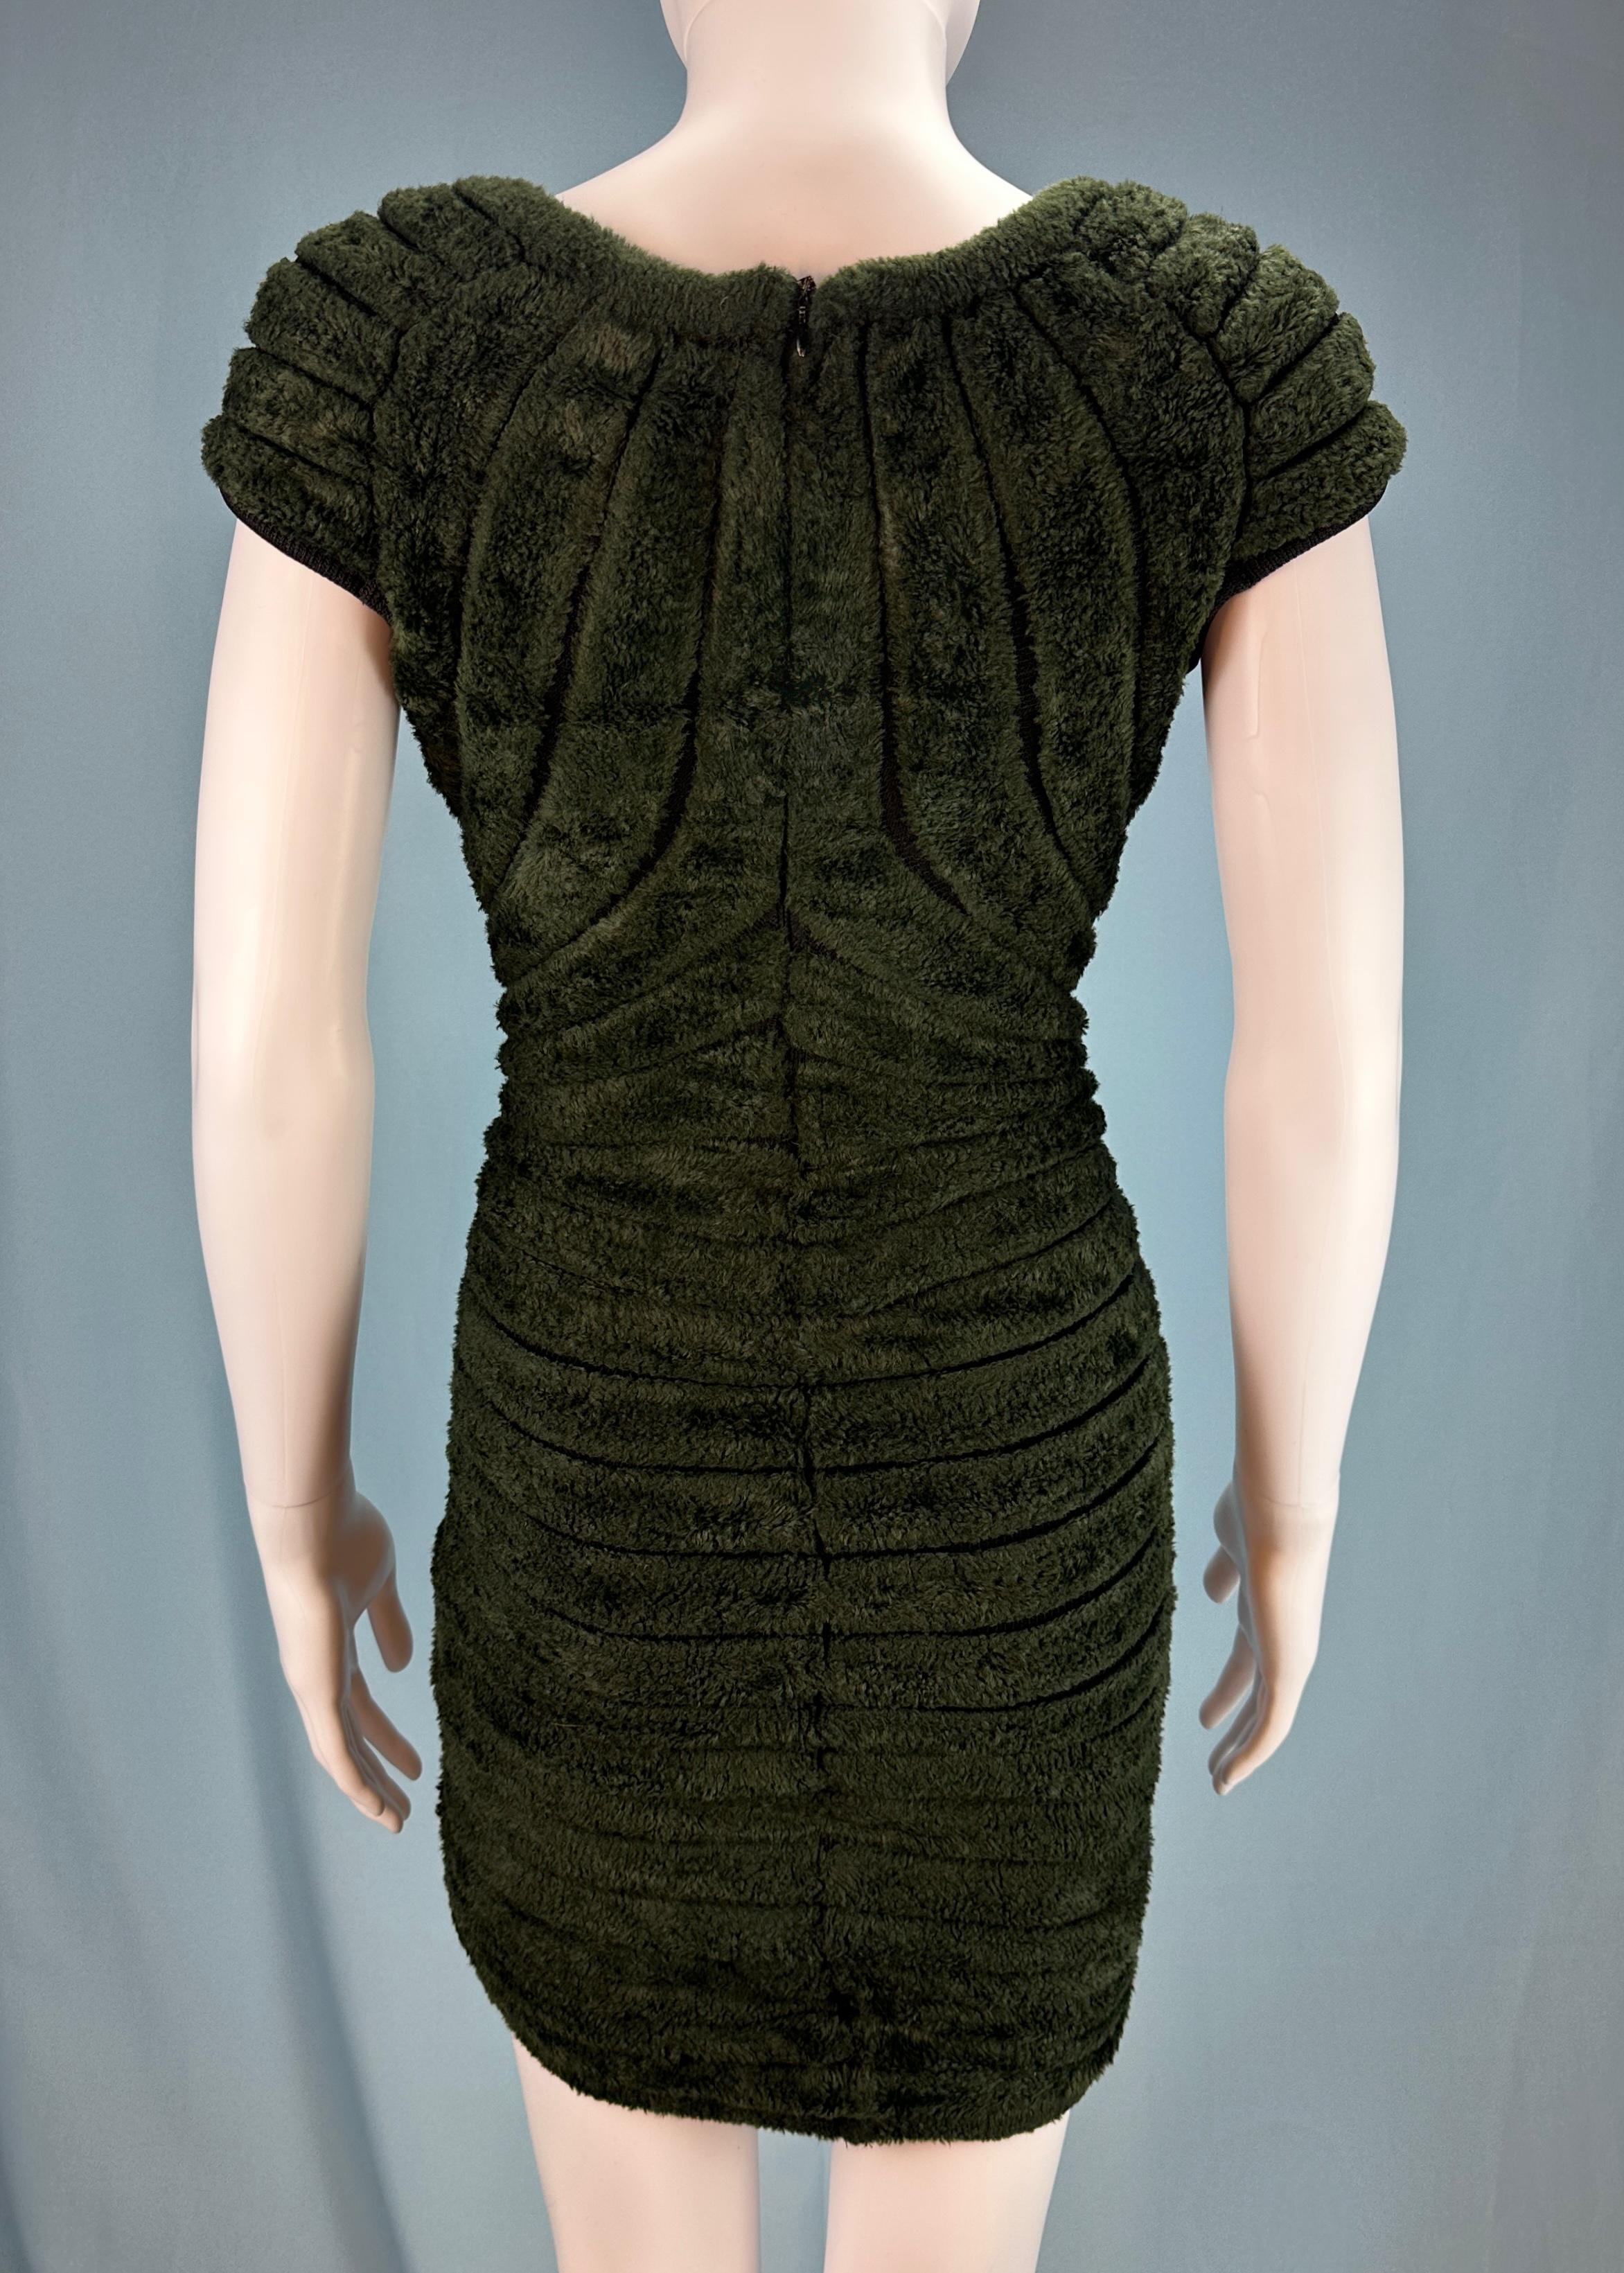 Azzedine Alaia Spring 1994 Houpette Chenille Green Dress In Good Condition For Sale In Hertfordshire, GB